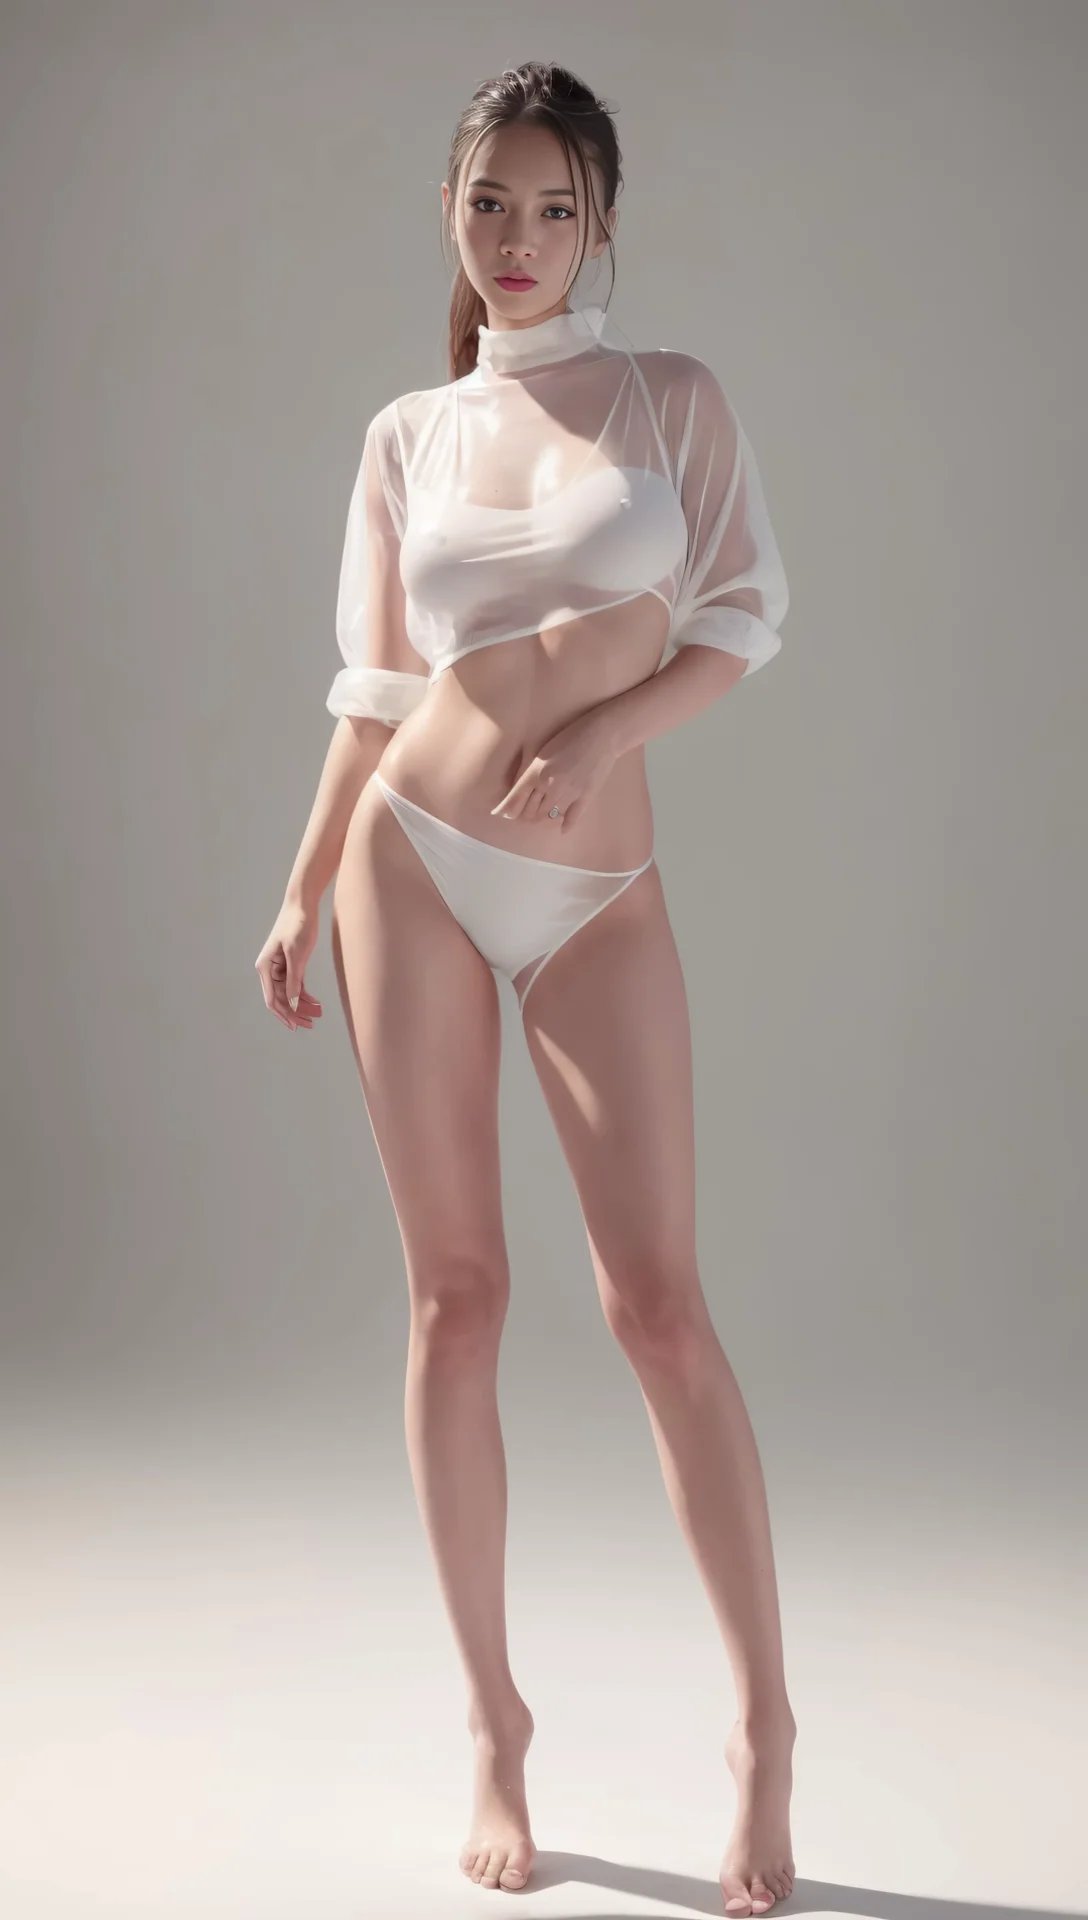 Ai Lookbook Beautiful Girl In A White Shirt And Panties Image 12